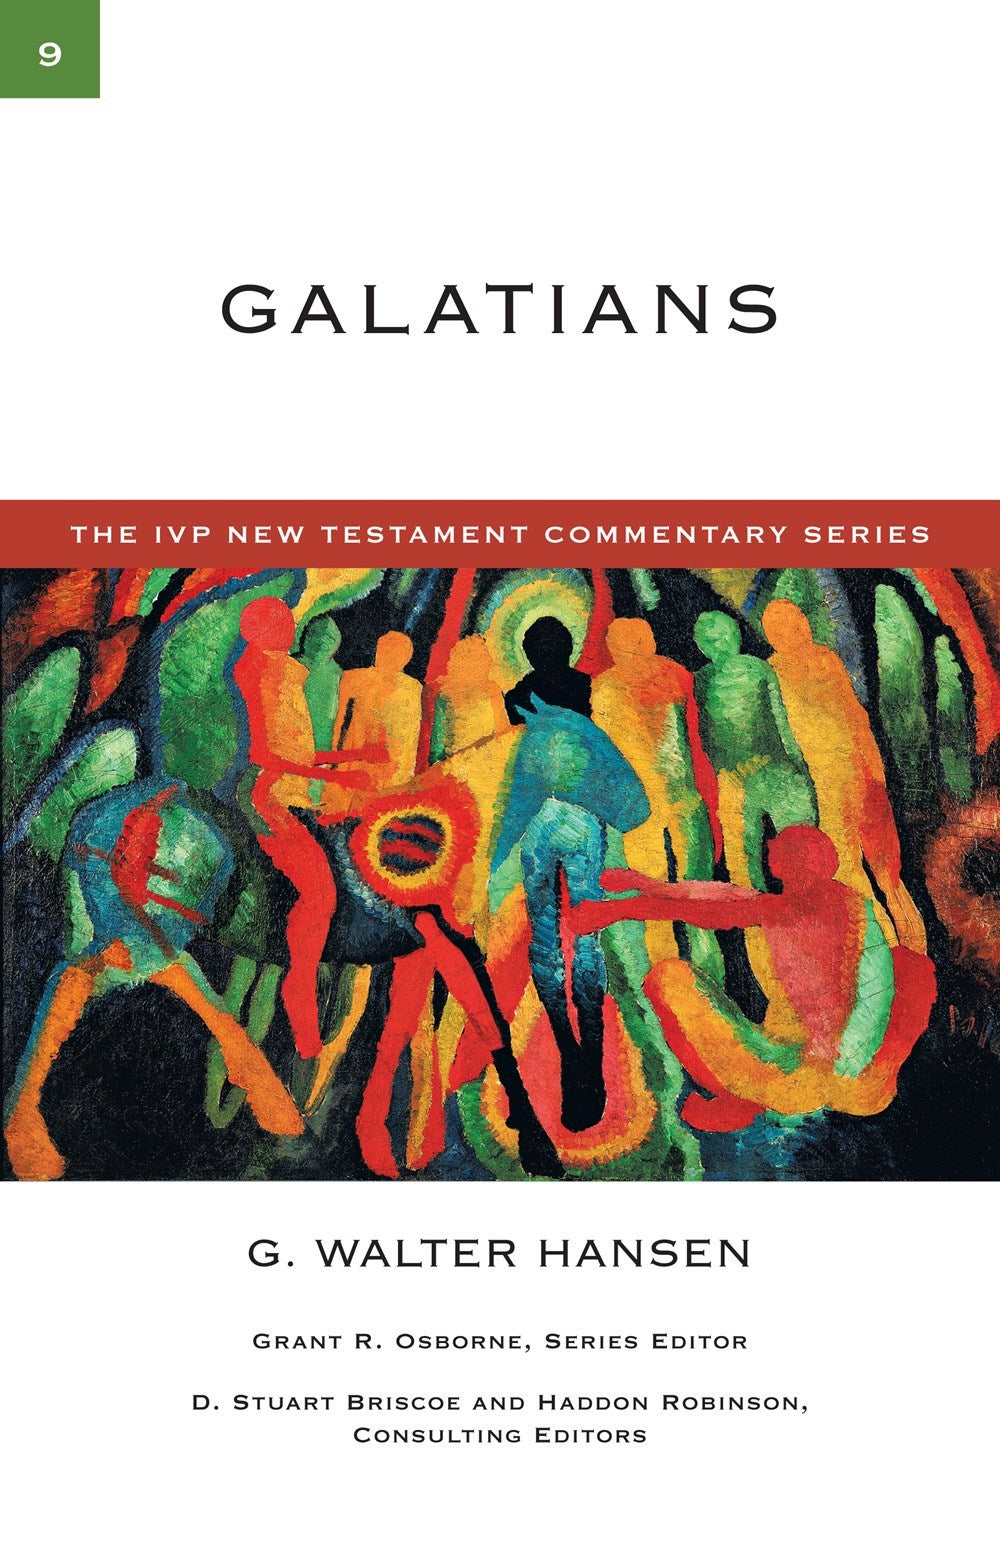 Galatians (The IVP New Testament Commentary Series Volume 9)